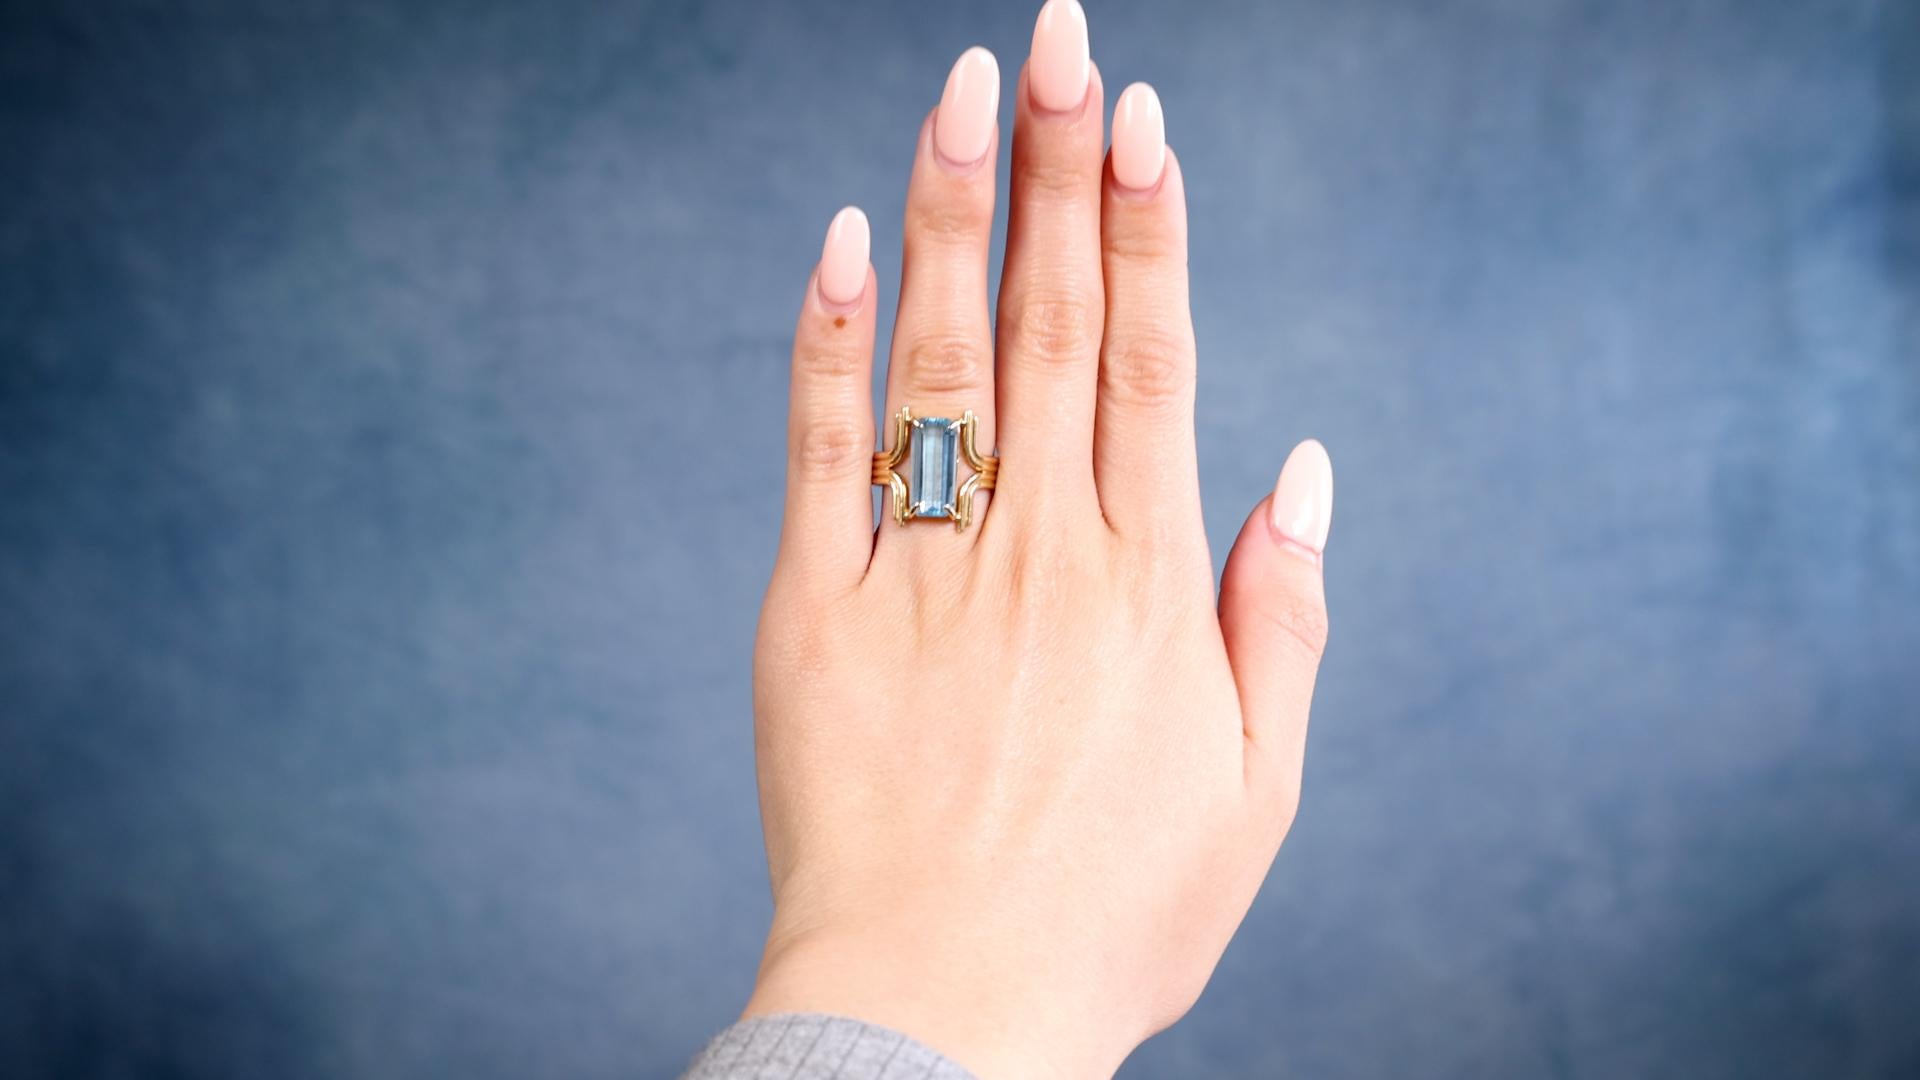 One Mid-Century Topaz 14k Yellow Gold Ring. Featuring one octagonal step cut sky blue topaz weighing approximately 4.30 carats. Crafted in 14 karat yellow gold with purity mark. Circa 1960. The ring is a size 8 and may be resized. 

About this Item: